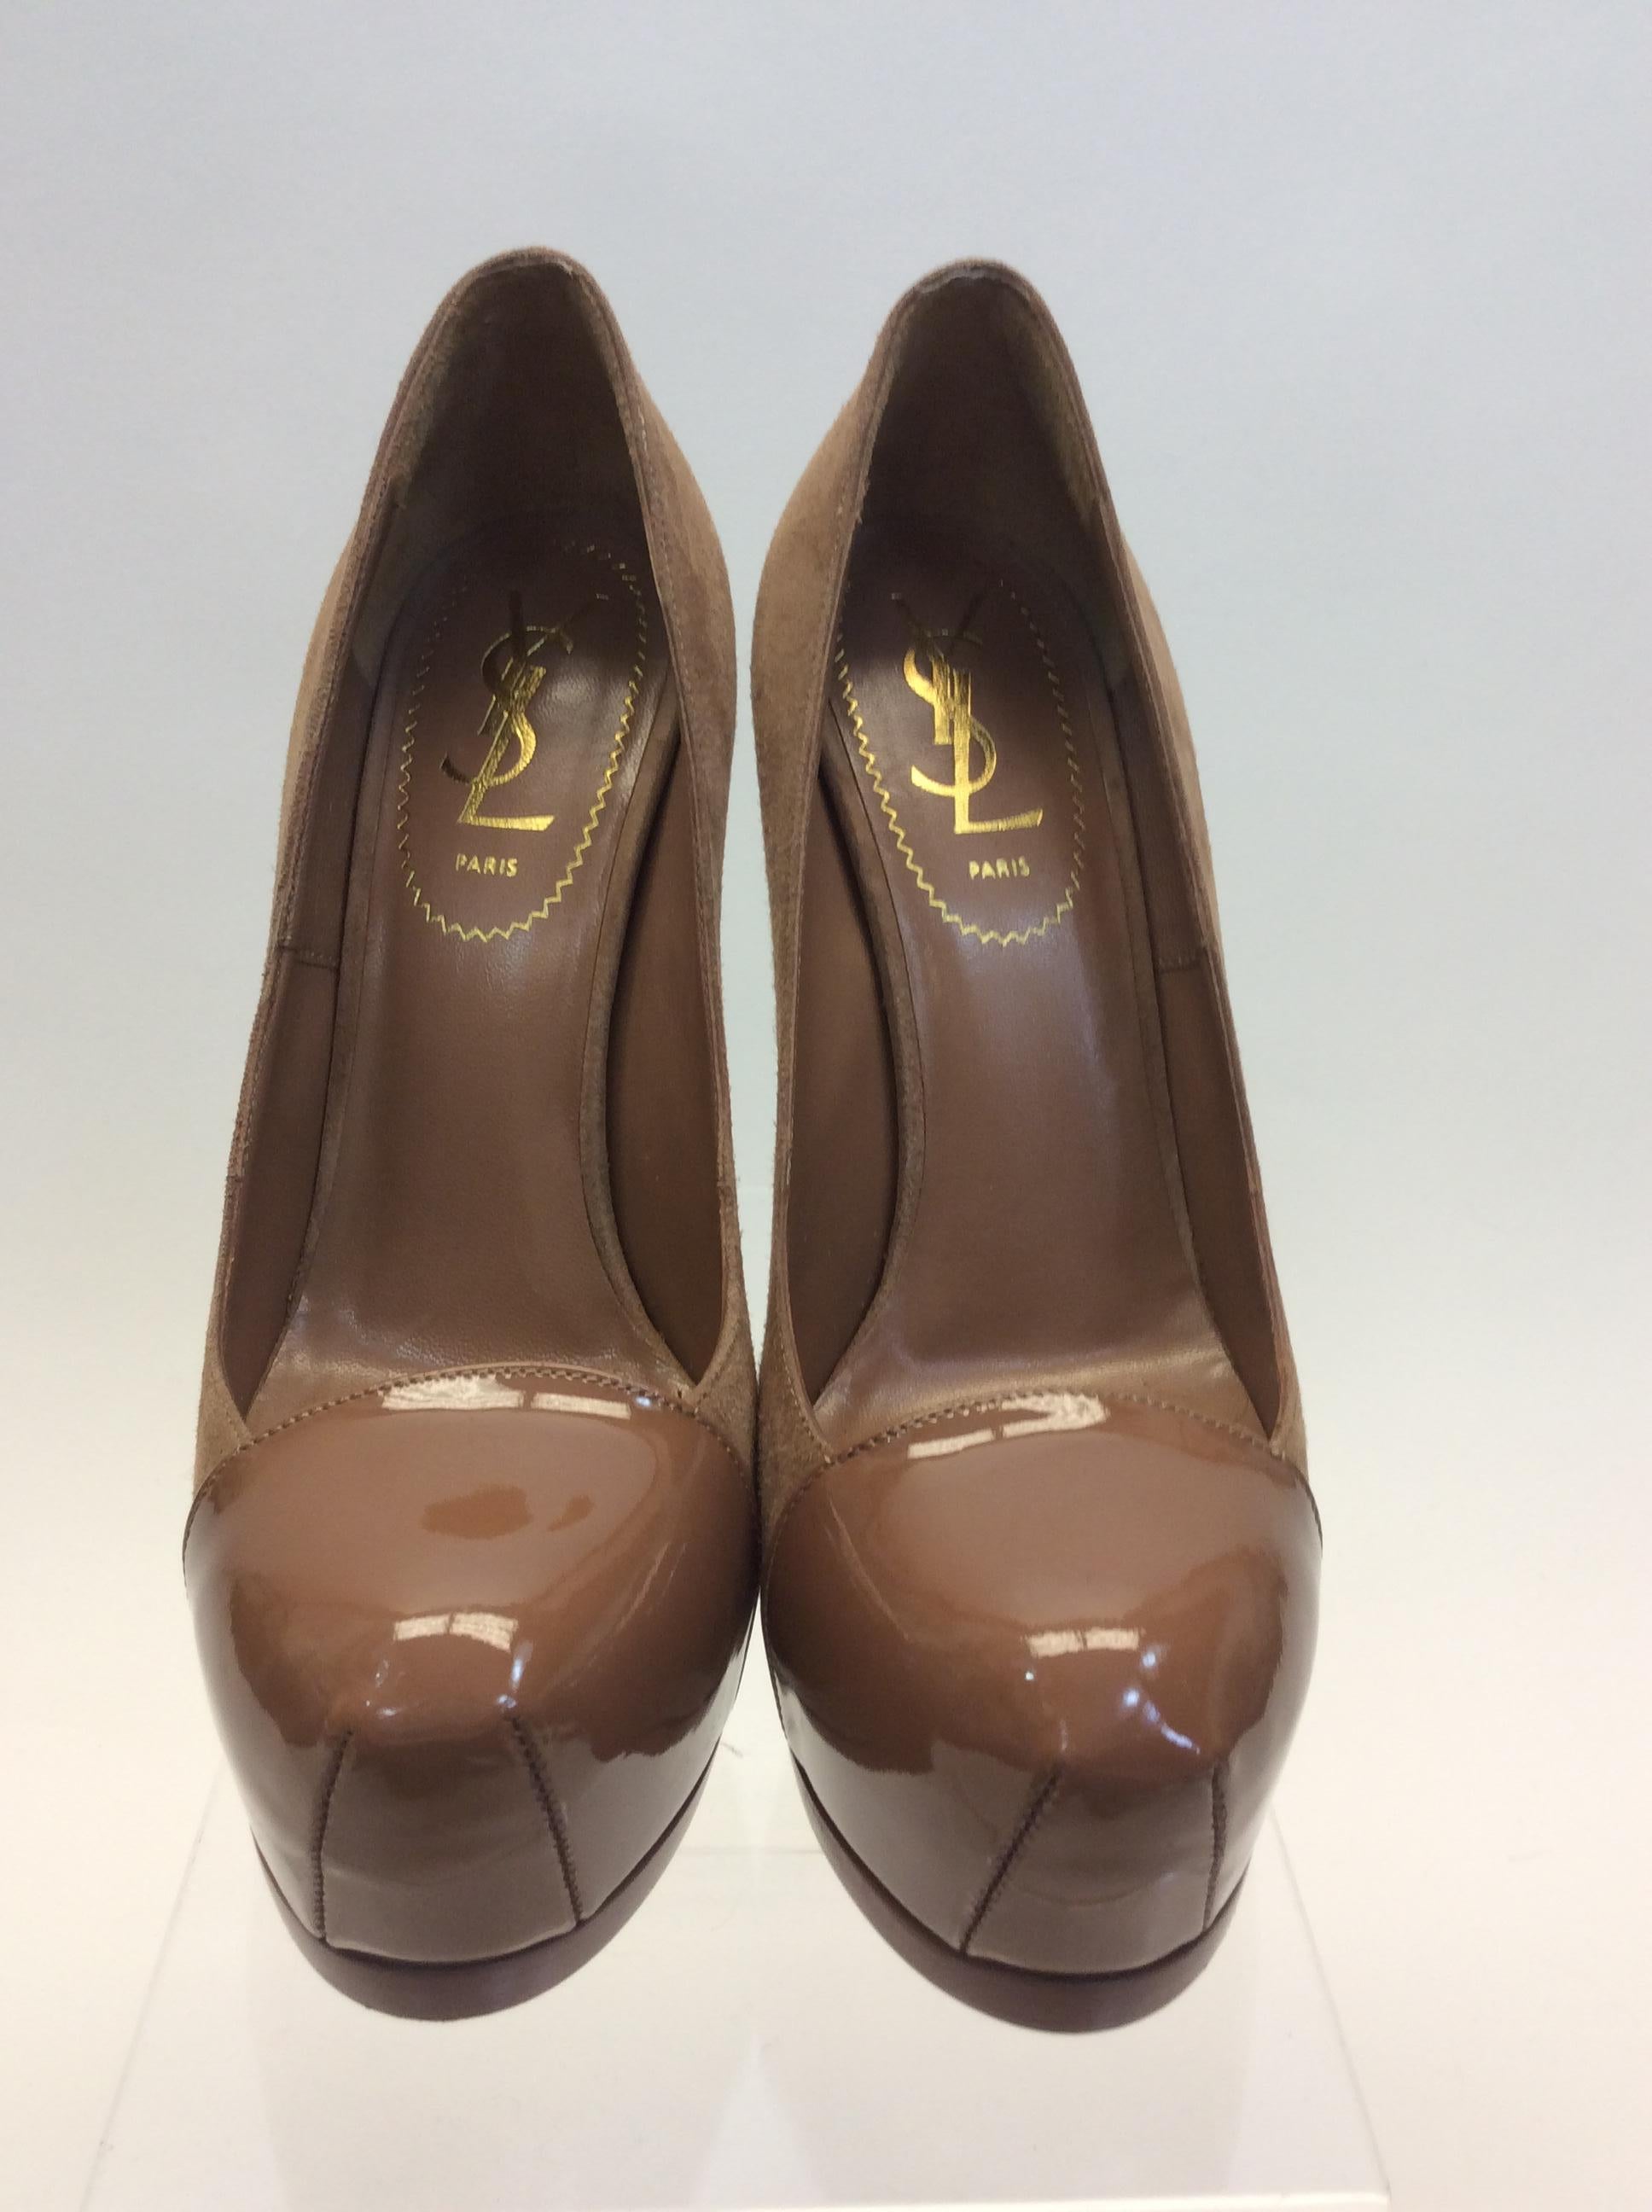 Yves Saint Laurent Nude Suede and Patent Leather Heels 
$399
Made in Italy
Leather and Suede
Size 36.5
1.5” platform
5.5” heel